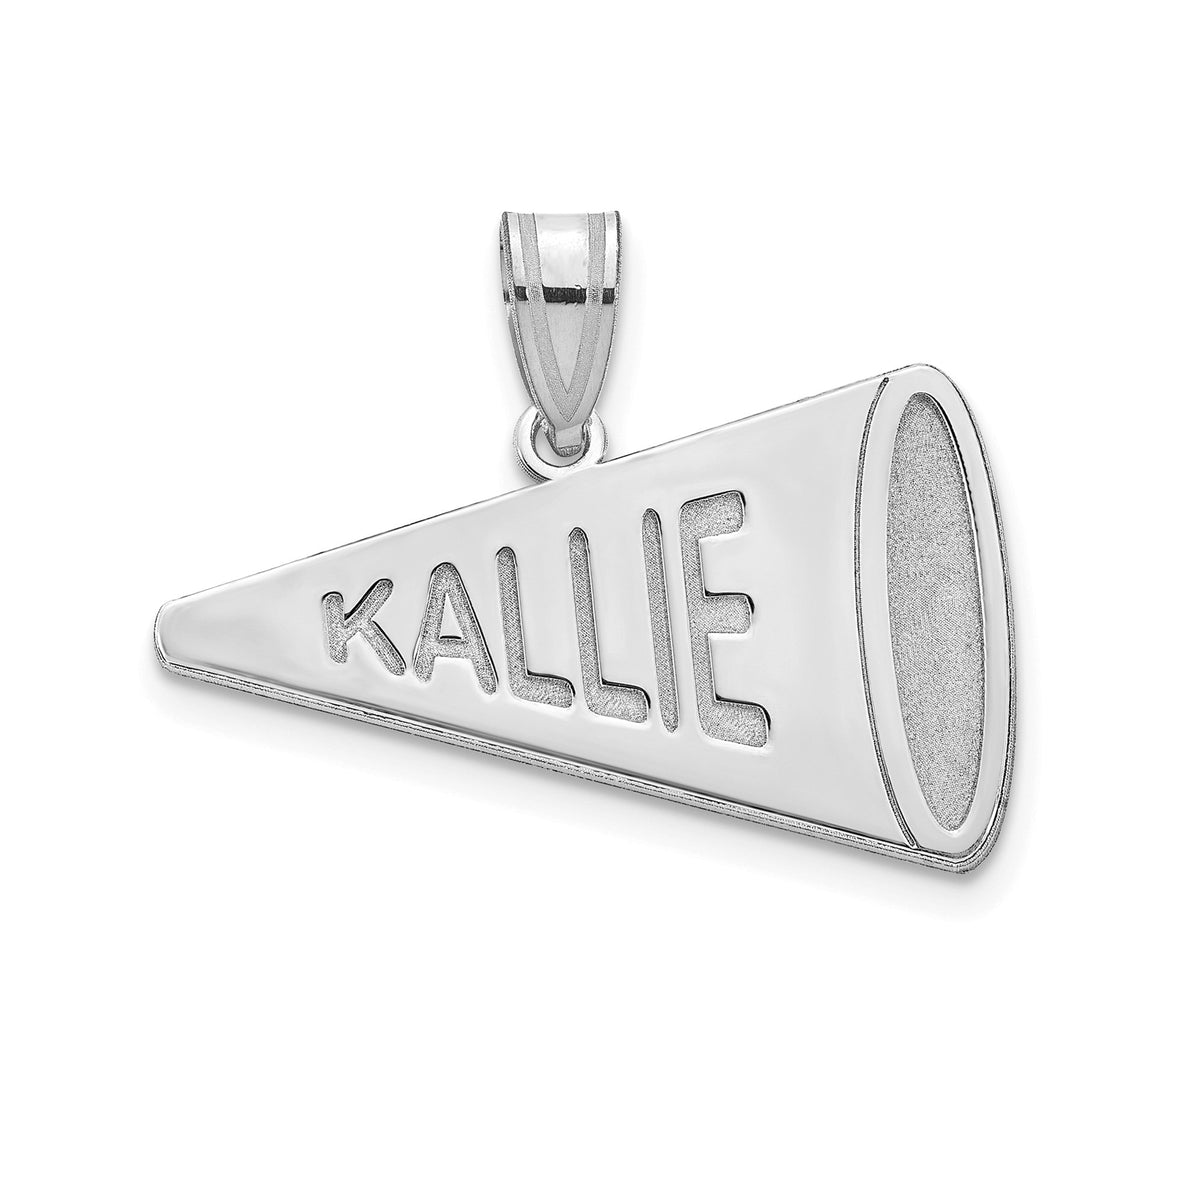 Personalized Cheerleader Megaphone w/ Name & Necklace included in Sterling Silver , Gold Plated or 10k Gold Laser Engraved